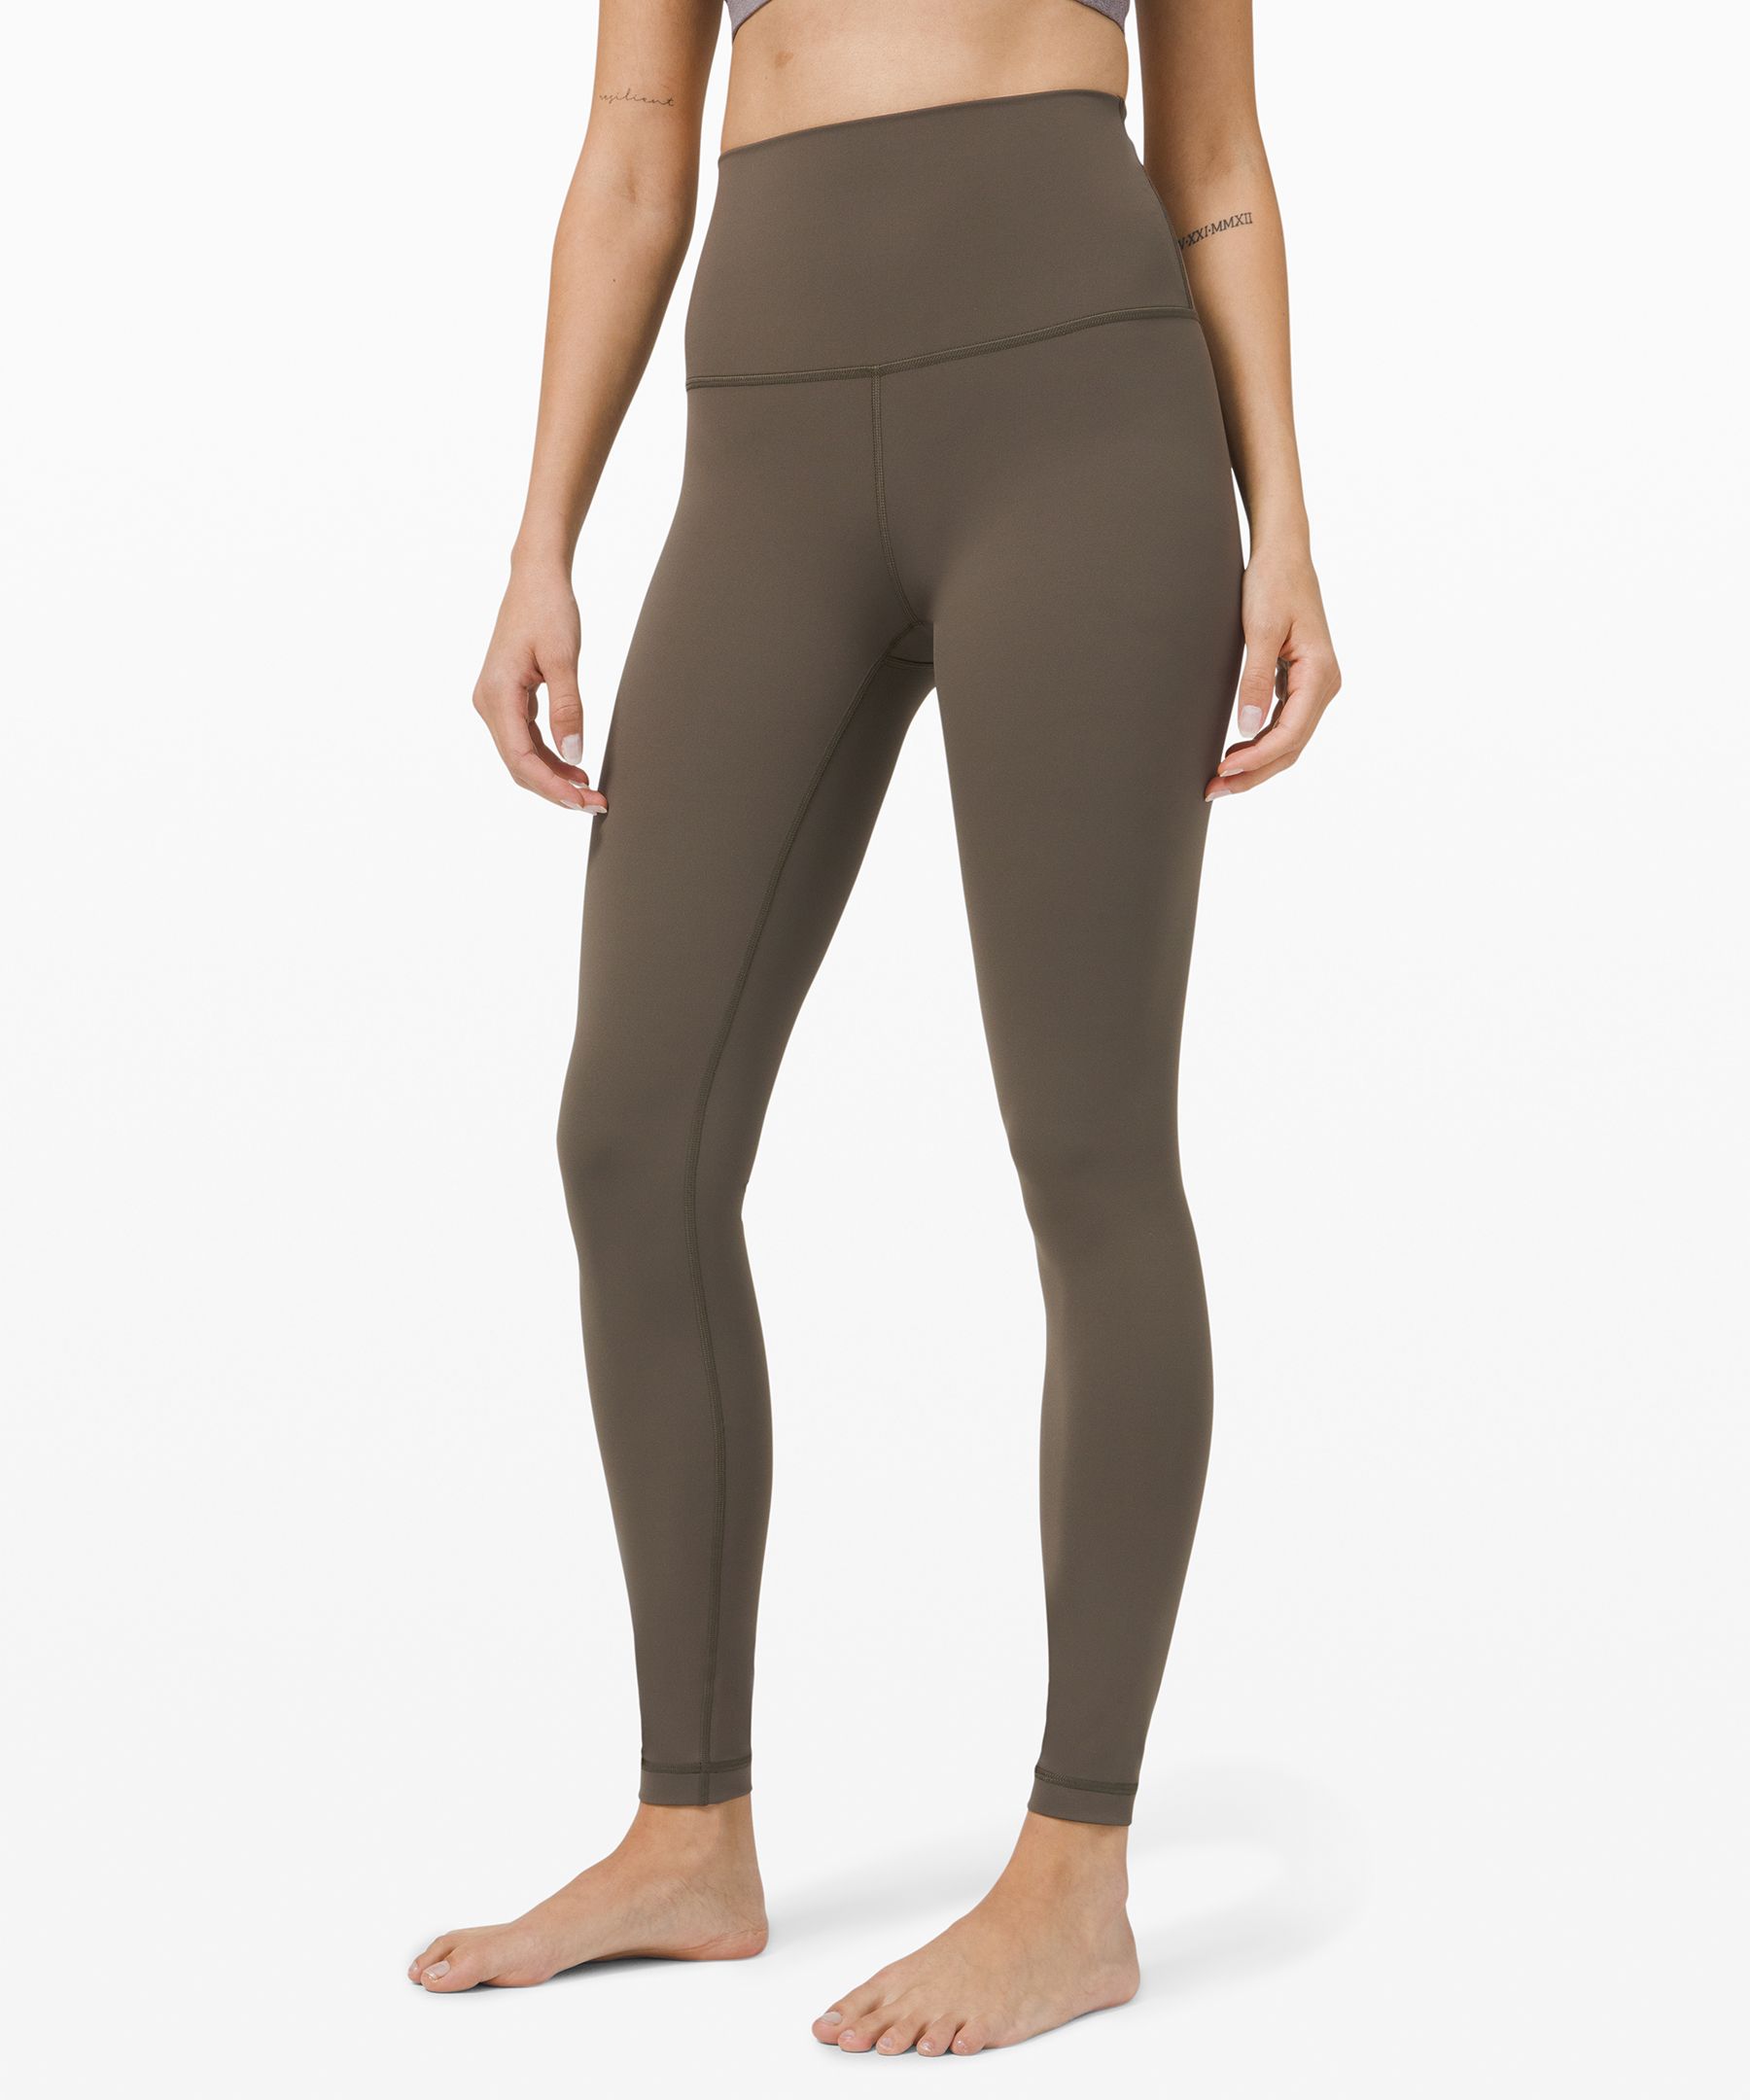 Lululemon Wunder Under Super High-rise Tight 28" *full-on Luxtreme Online Only In Green